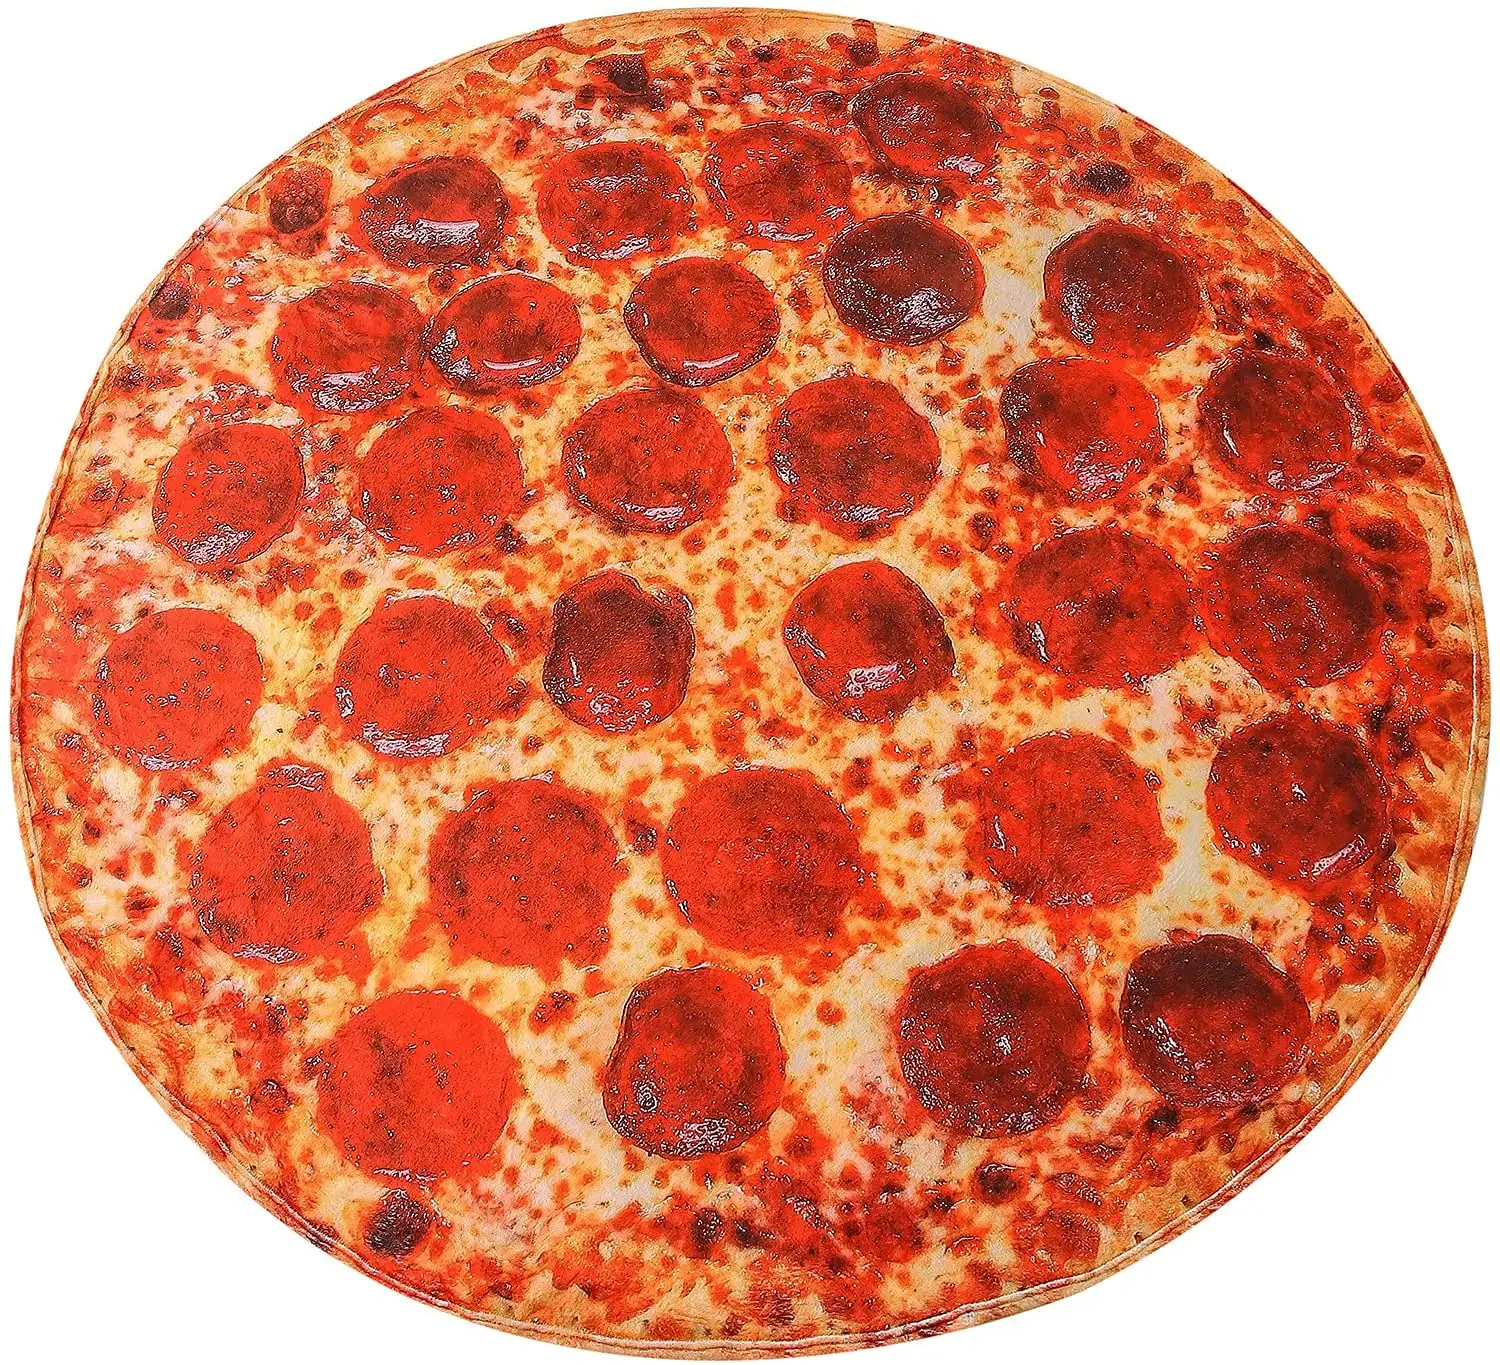 Pizza Throw Soft For Kids And Adult Digital Printed Fleece Novelty Realistic Funny Food Warm Flannel Blanket